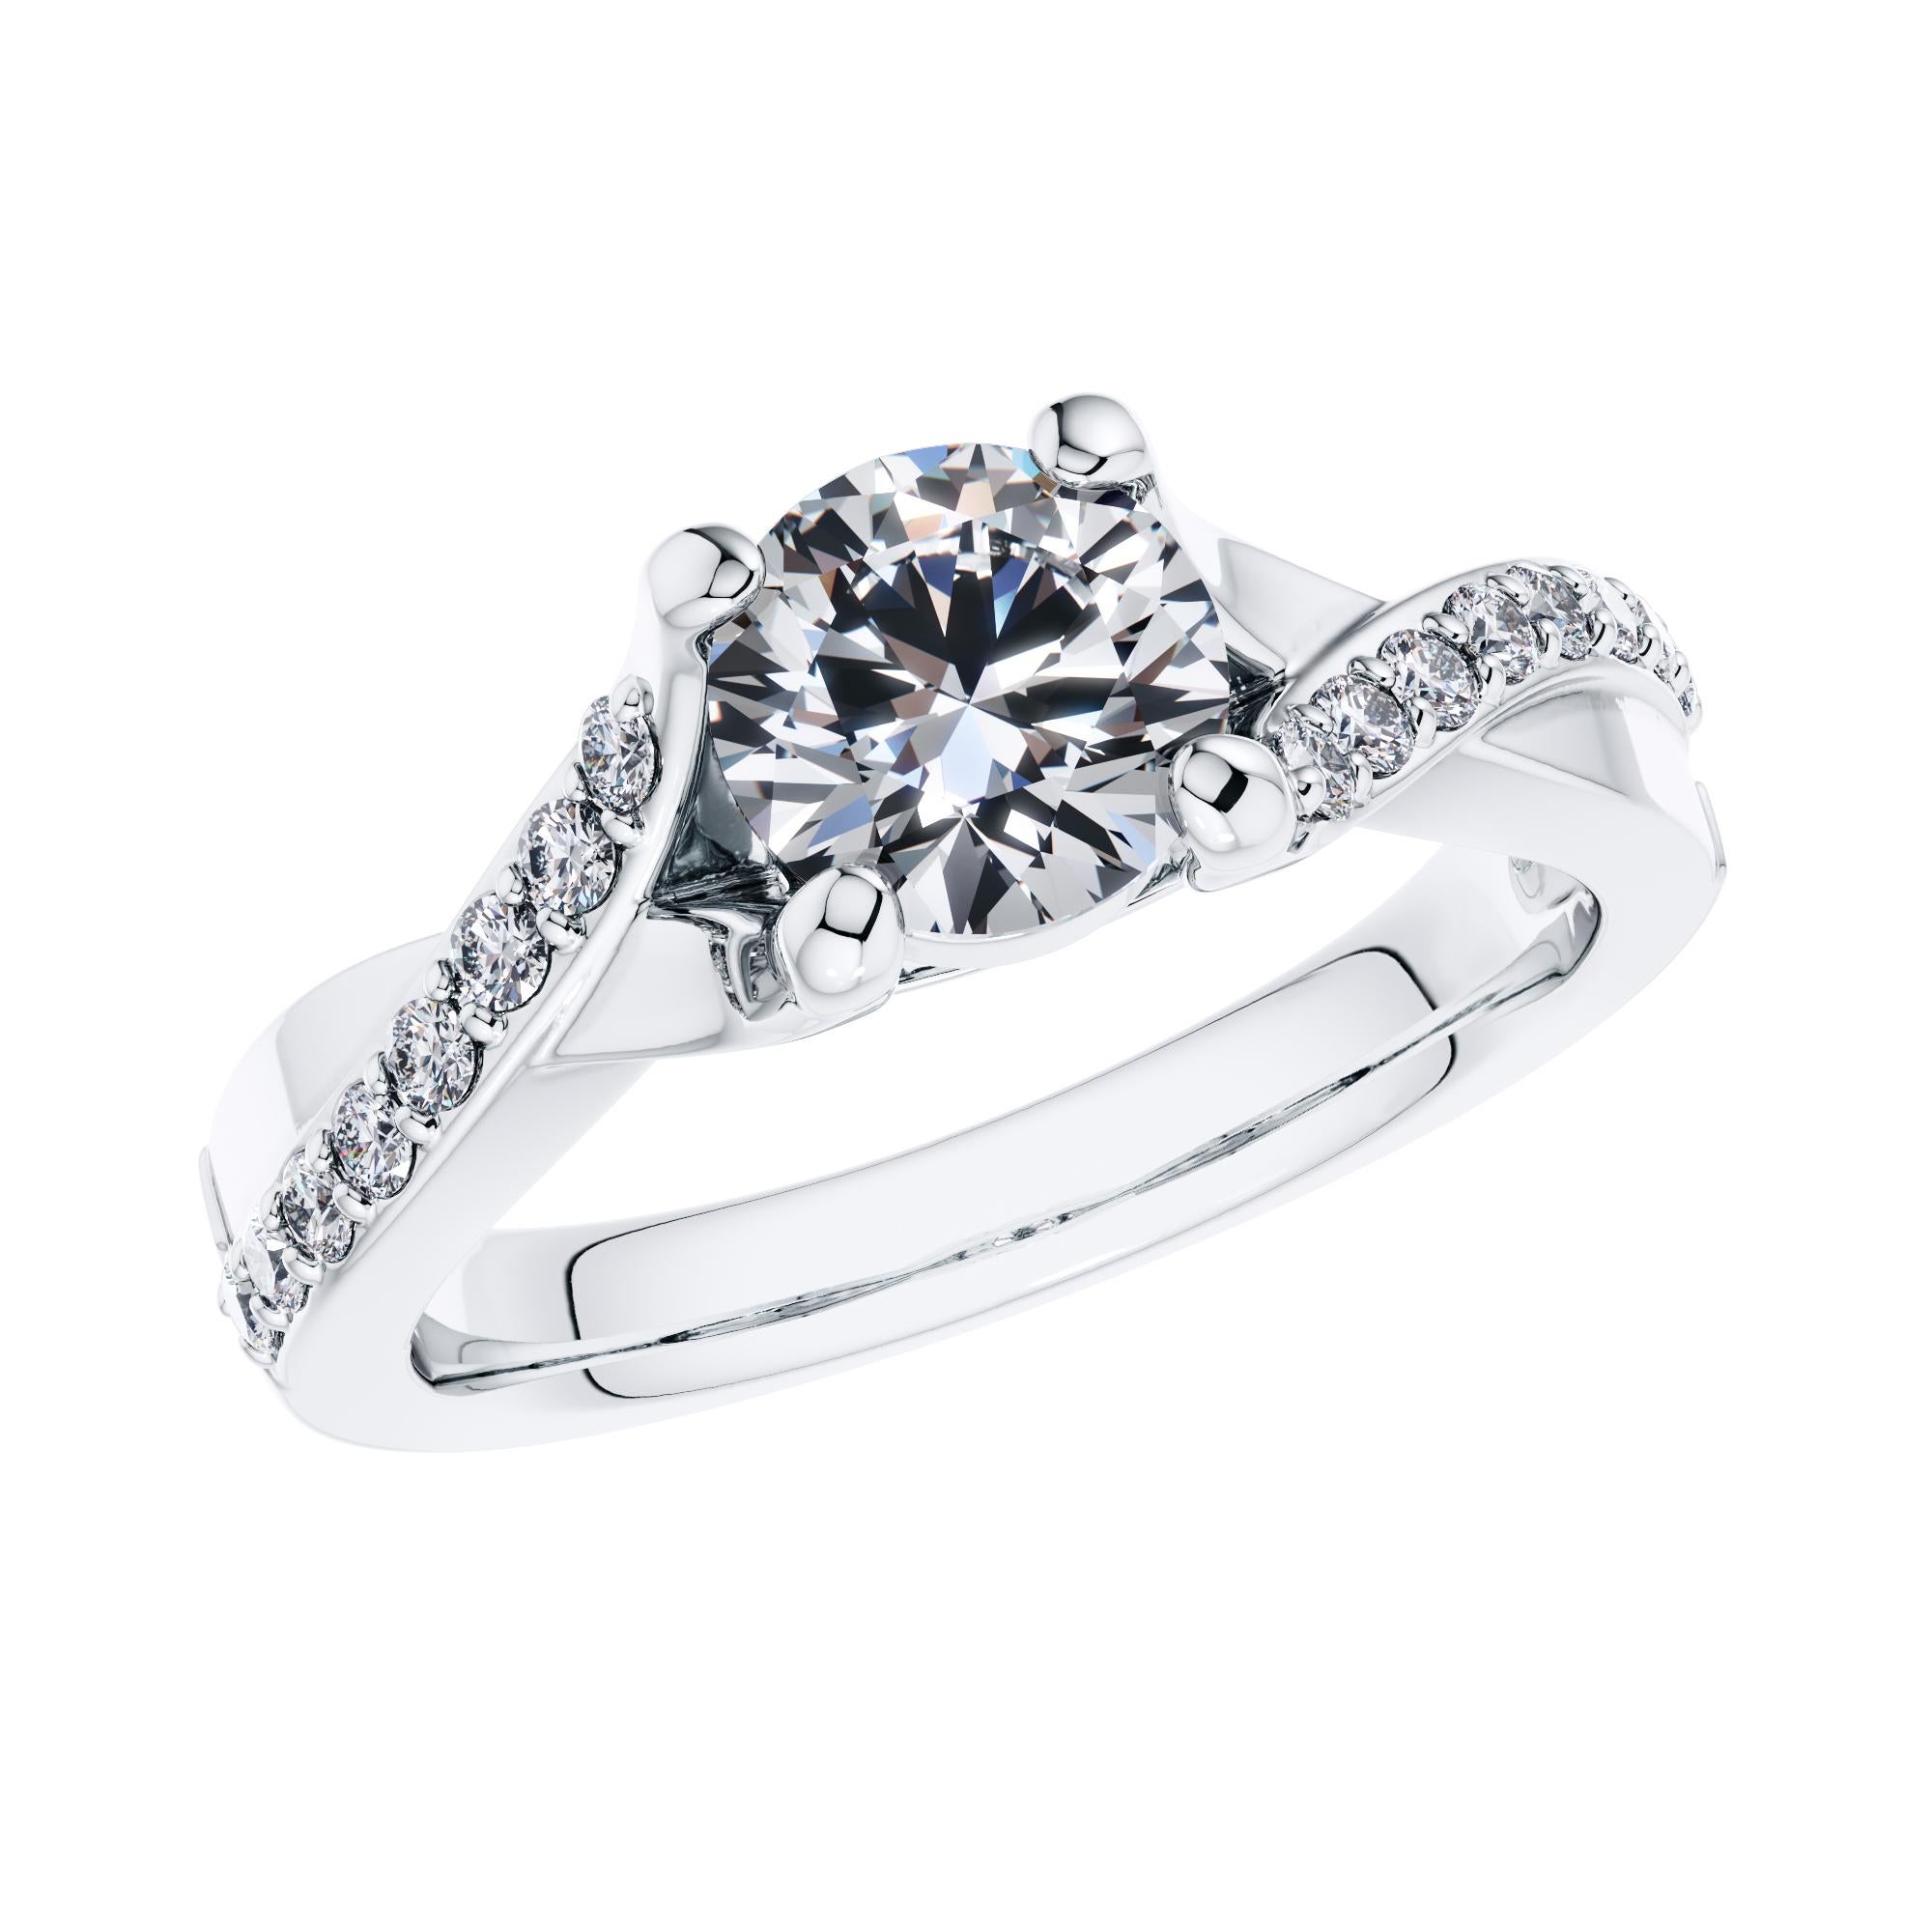 For a beautifully entwined journey together, this gleaming twisted vine modern classic engagement ring. Handmade in 18 Karat White Gold, with a total of 1.68 Carat White Diamonds. Set in an open gallery 4 prong mount with a split shank that has one